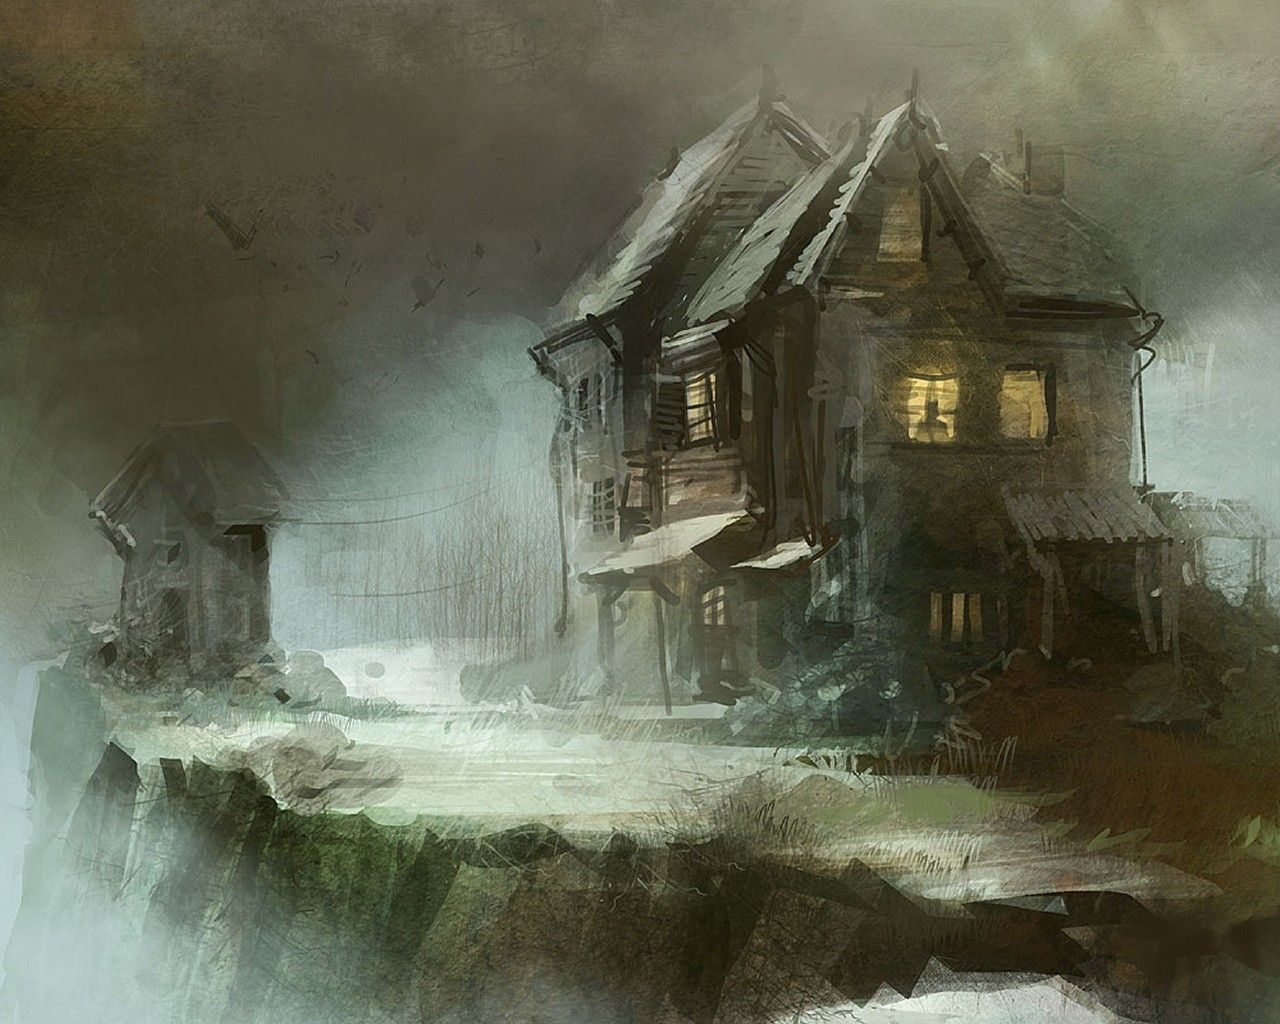 2 Spooky HD Wallpapers | Backgrounds - Wallpaper Abyss